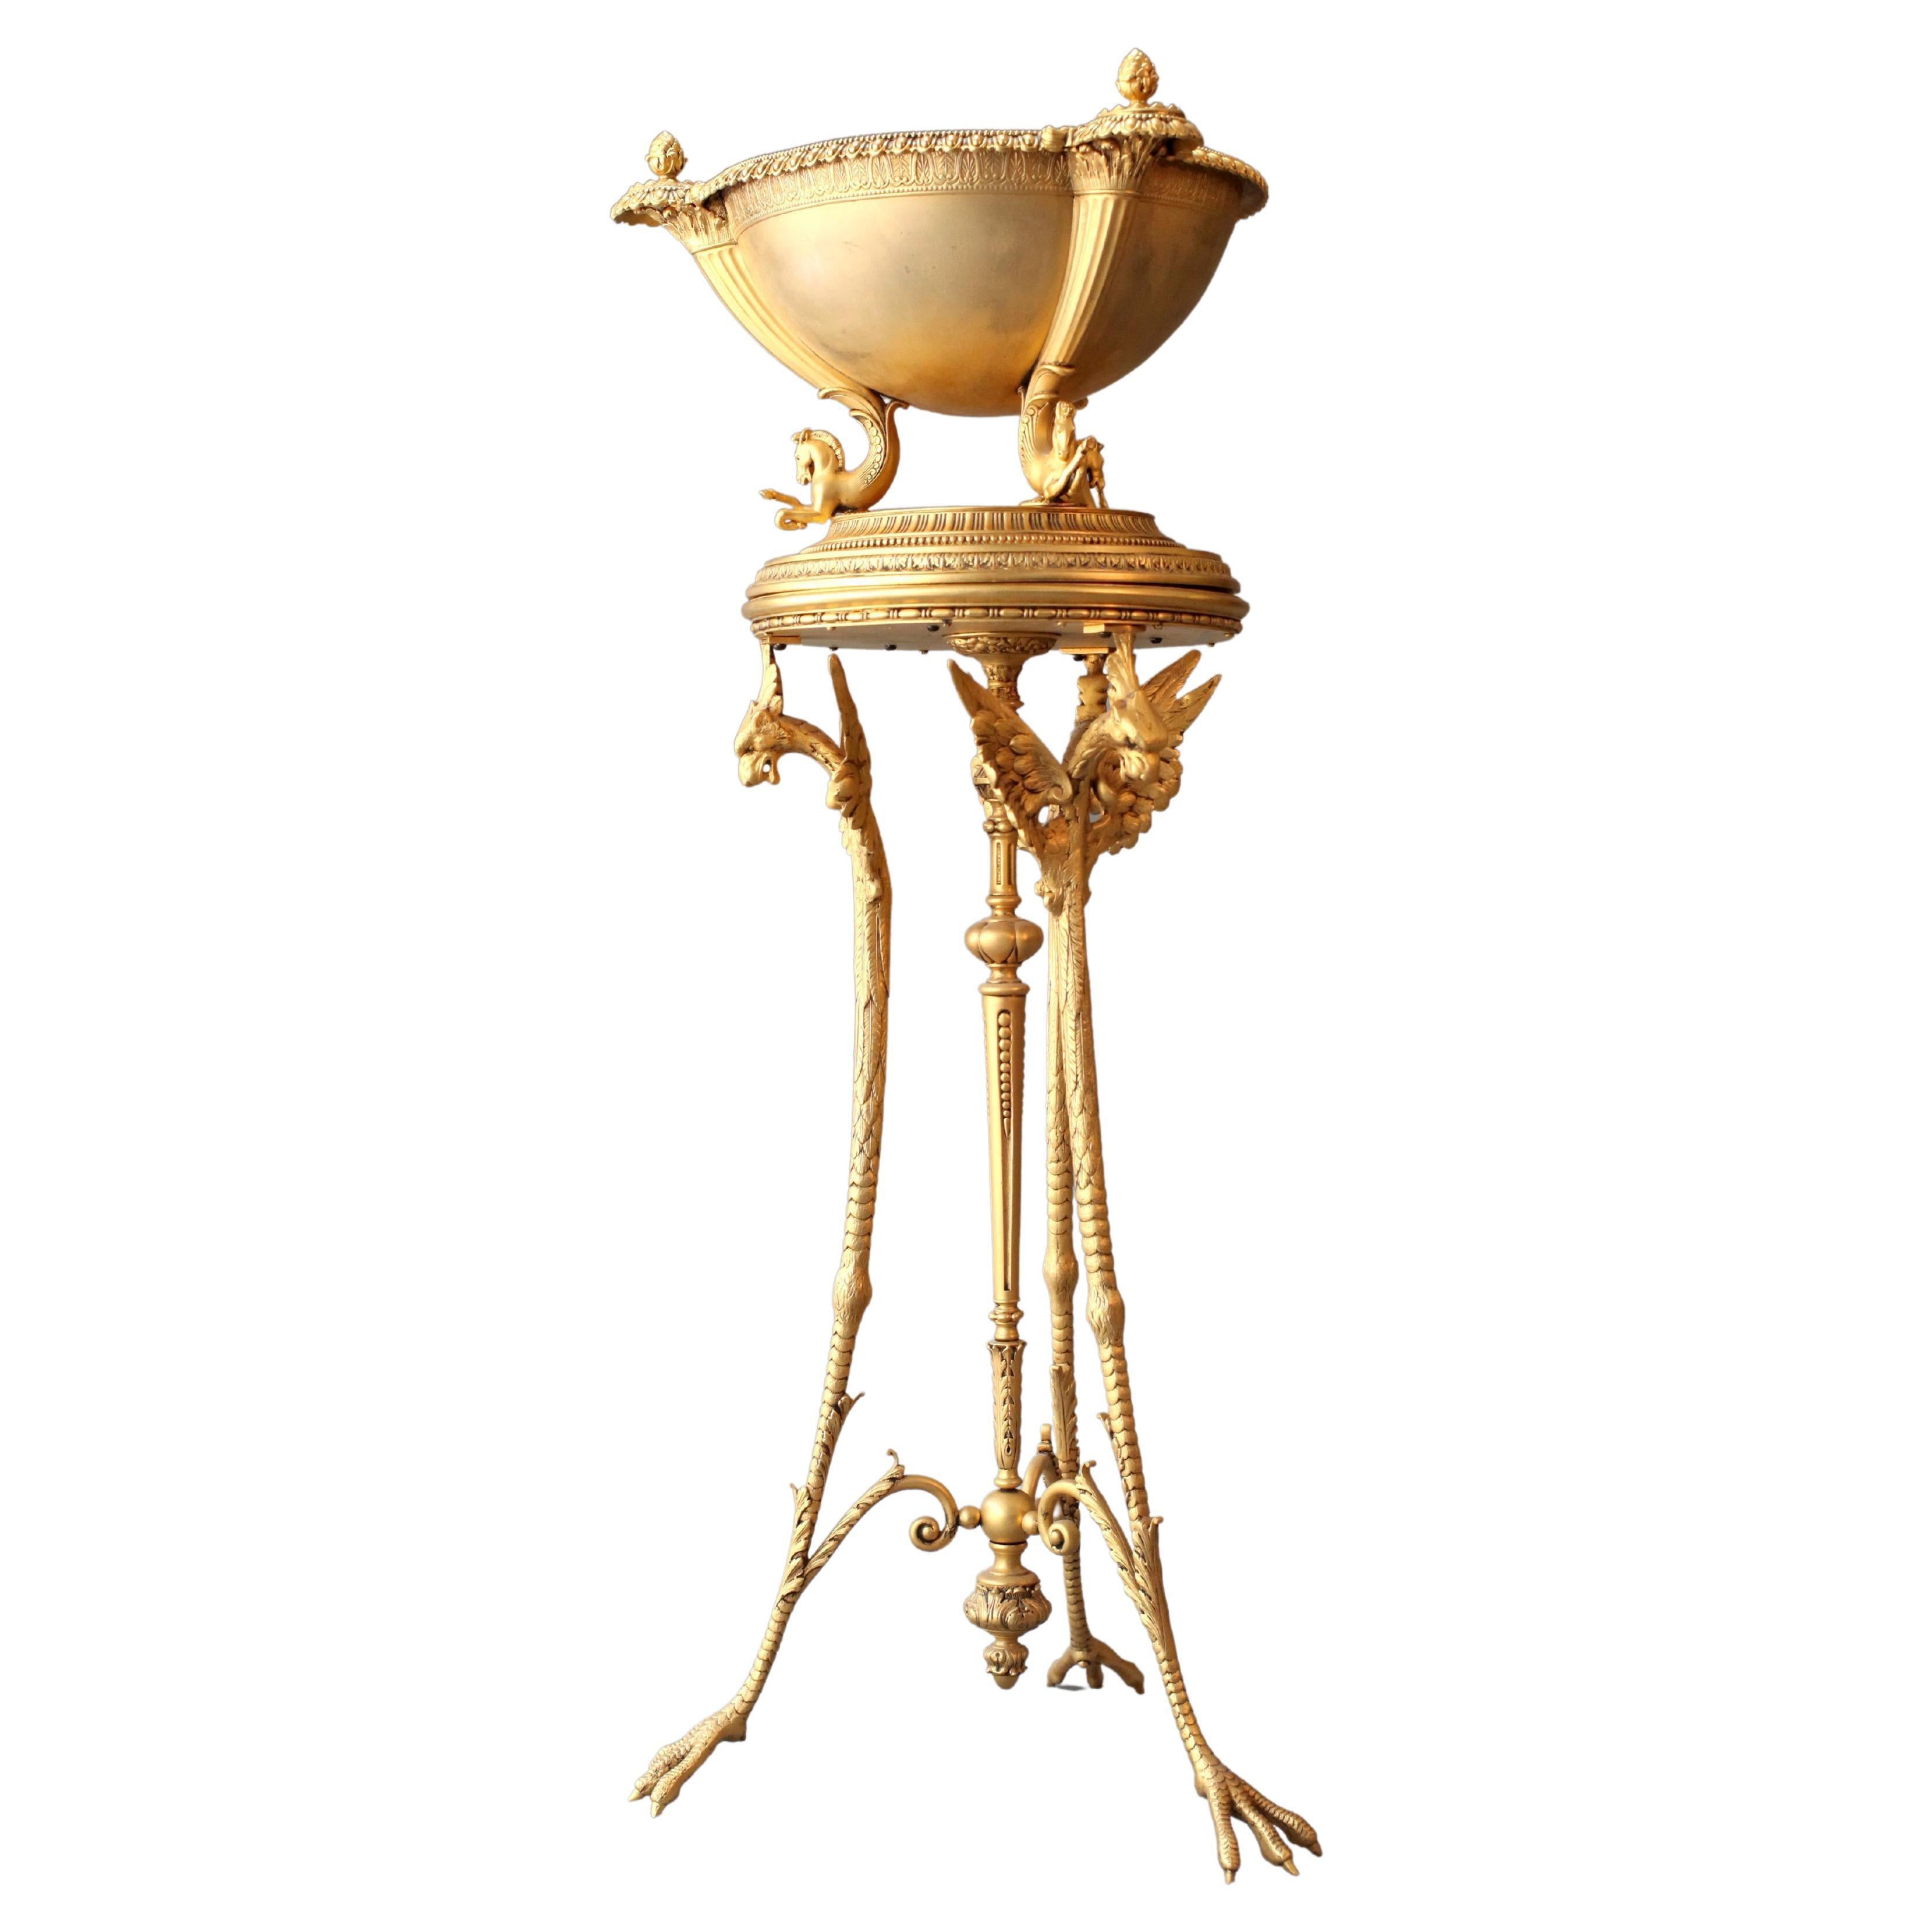 Antique Louis XVI Style Gilt Bronze Athénienne Compote By Meridan Brittania Co